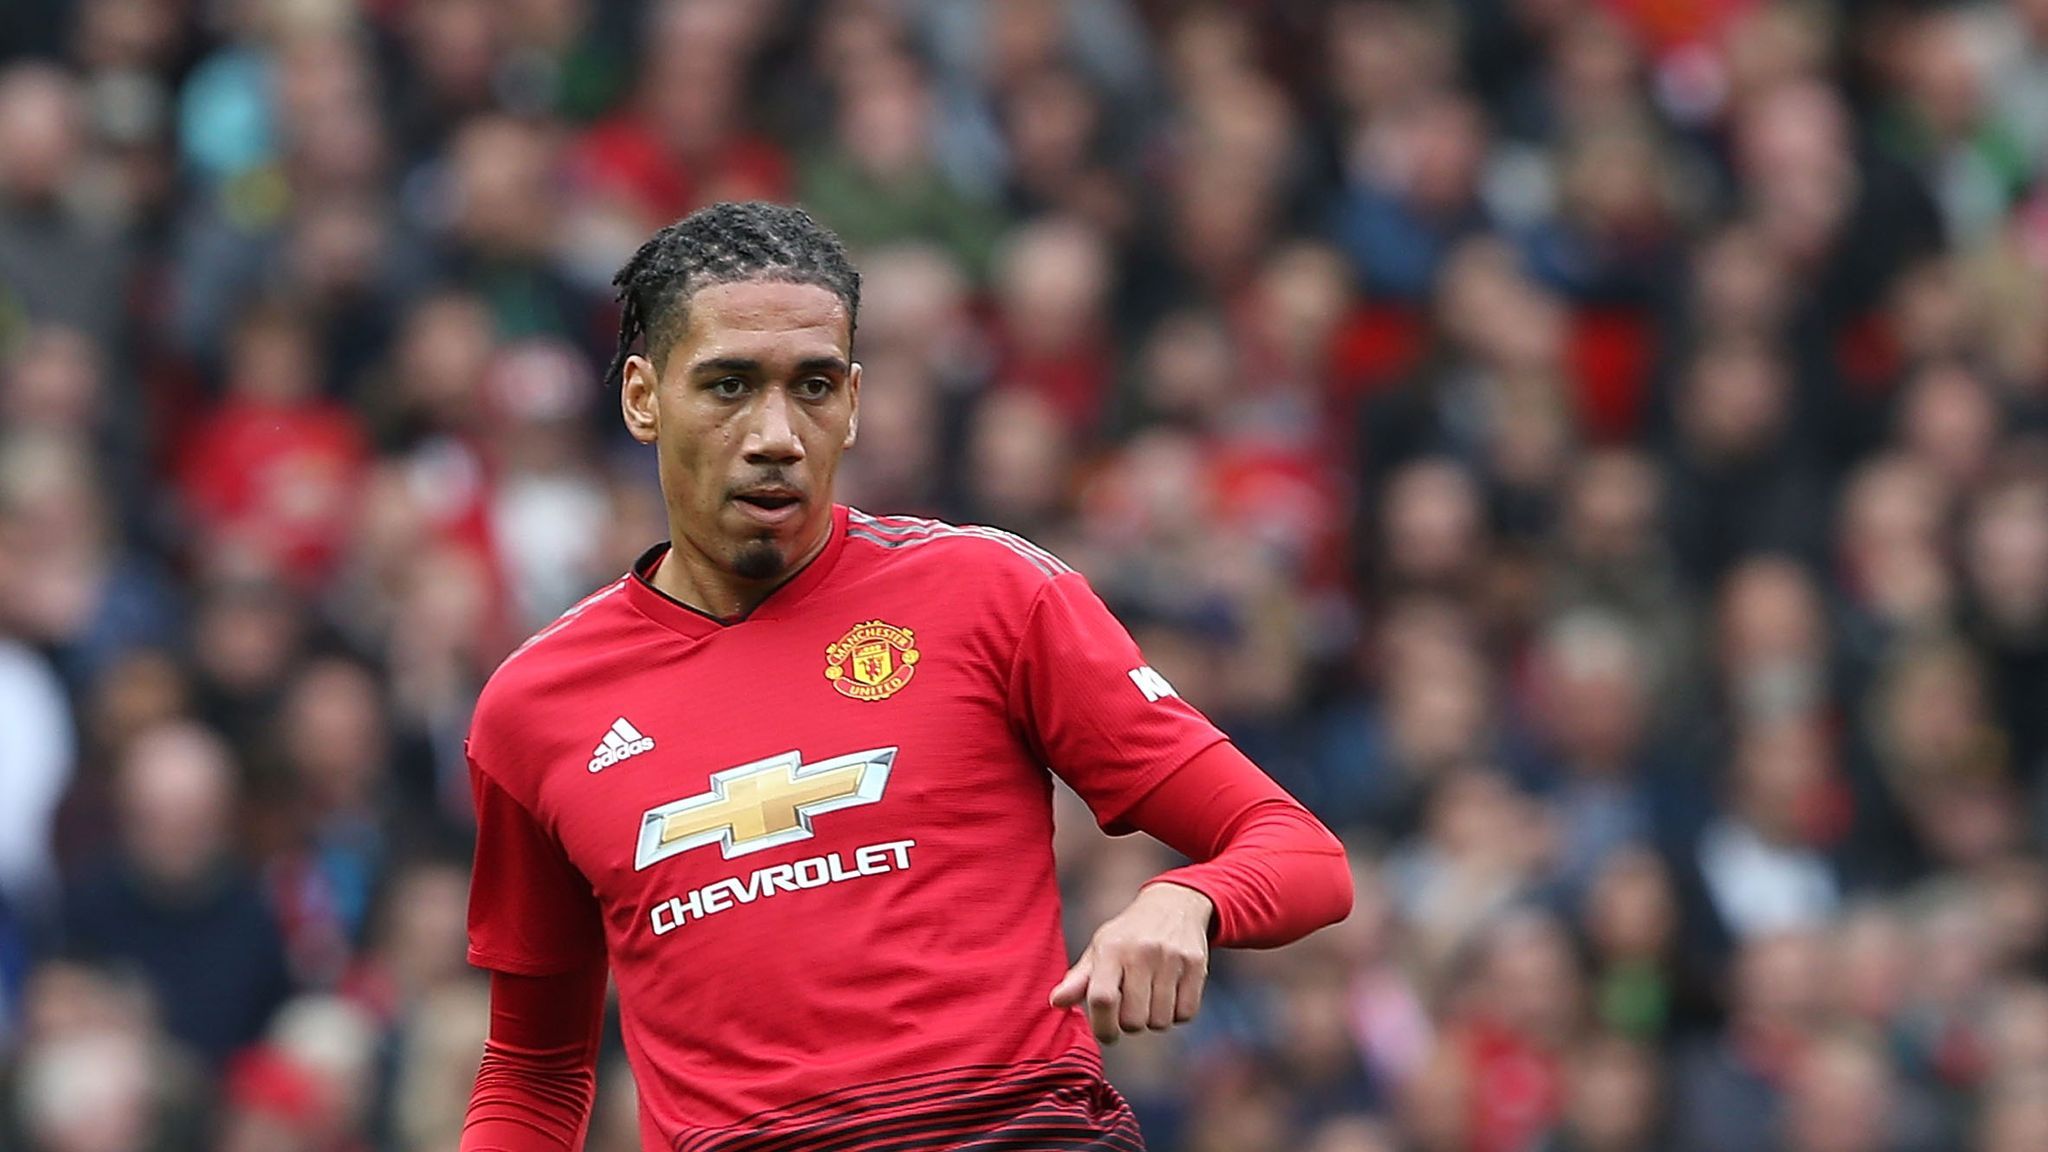 Chris Smalling is in talks with Manchester United over a new contract